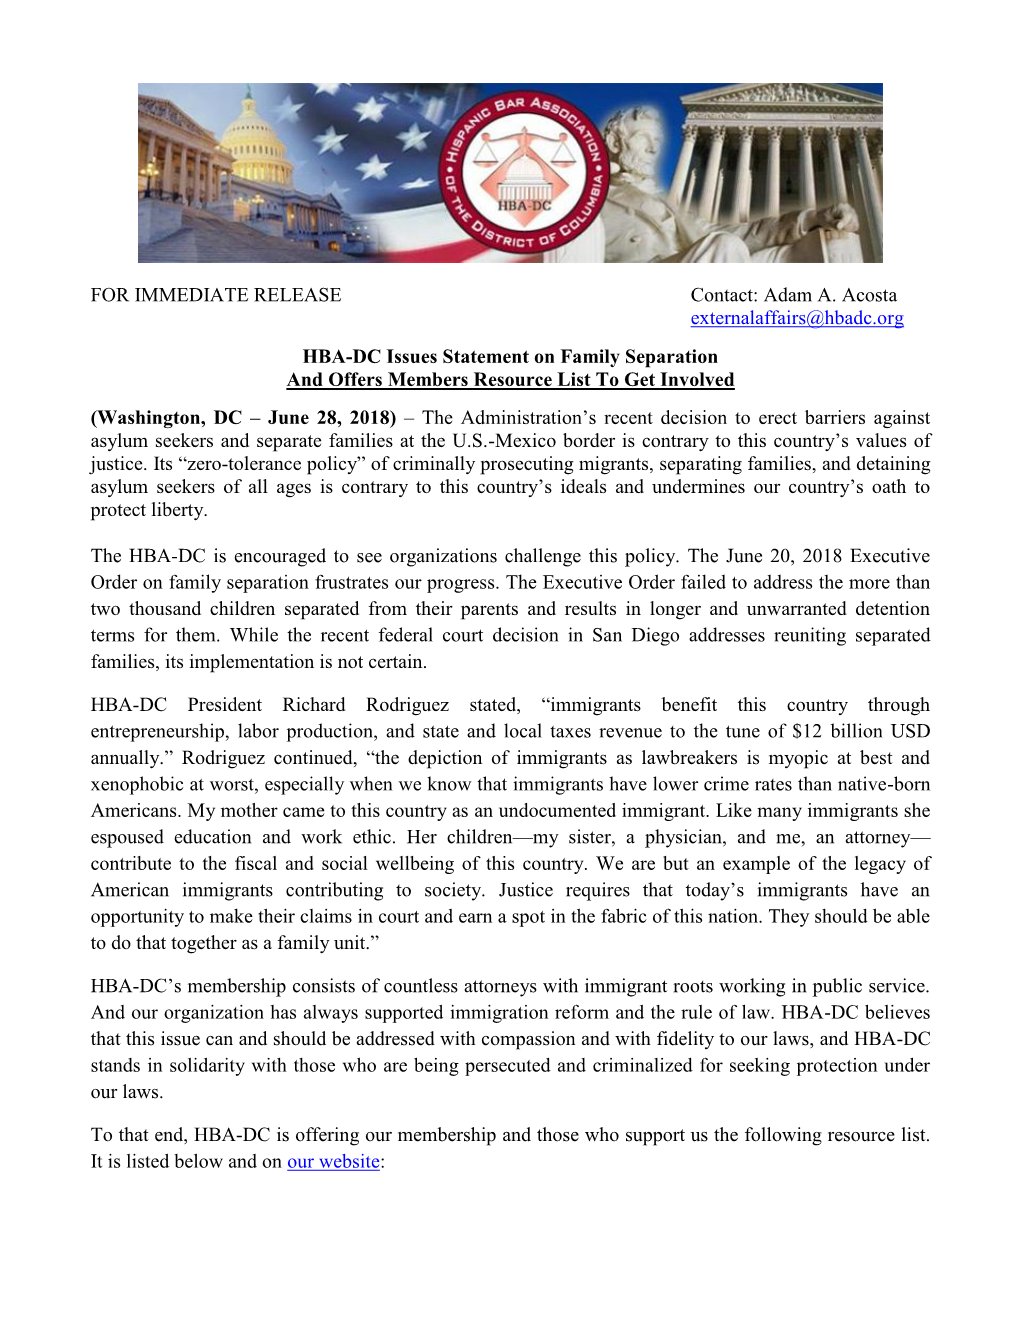 FOR IMMEDIATE RELEASE Contact: Adam A. Acosta Externalaffairs@Hbadc.Org HBA-DC Issues Statement on Family Separation and Offers